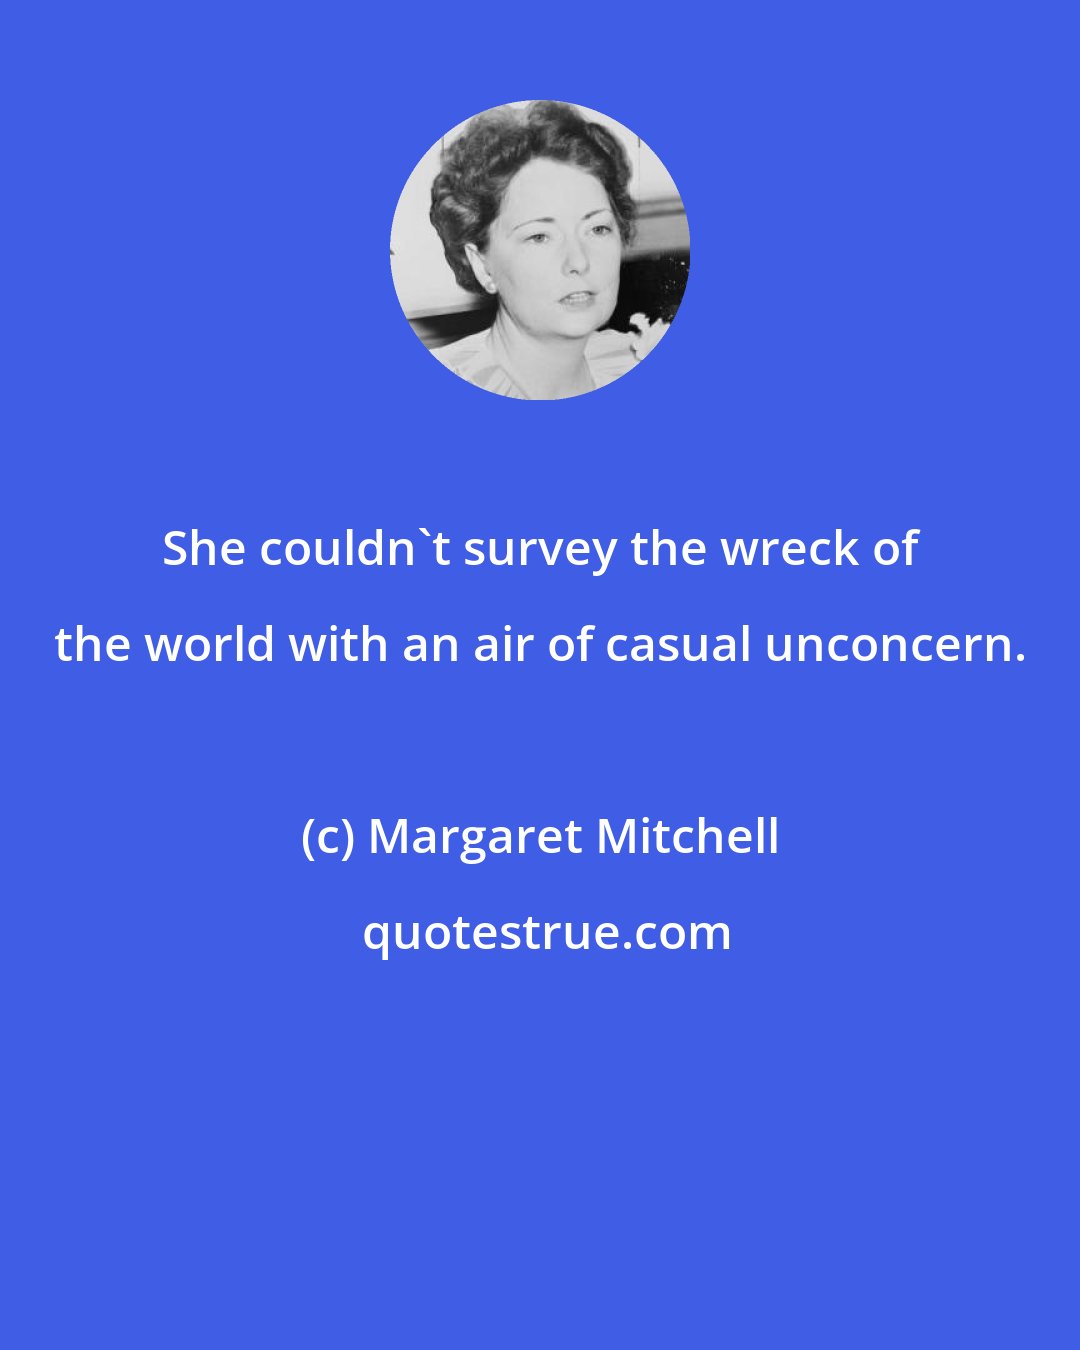 Margaret Mitchell: She couldn't survey the wreck of the world with an air of casual unconcern.